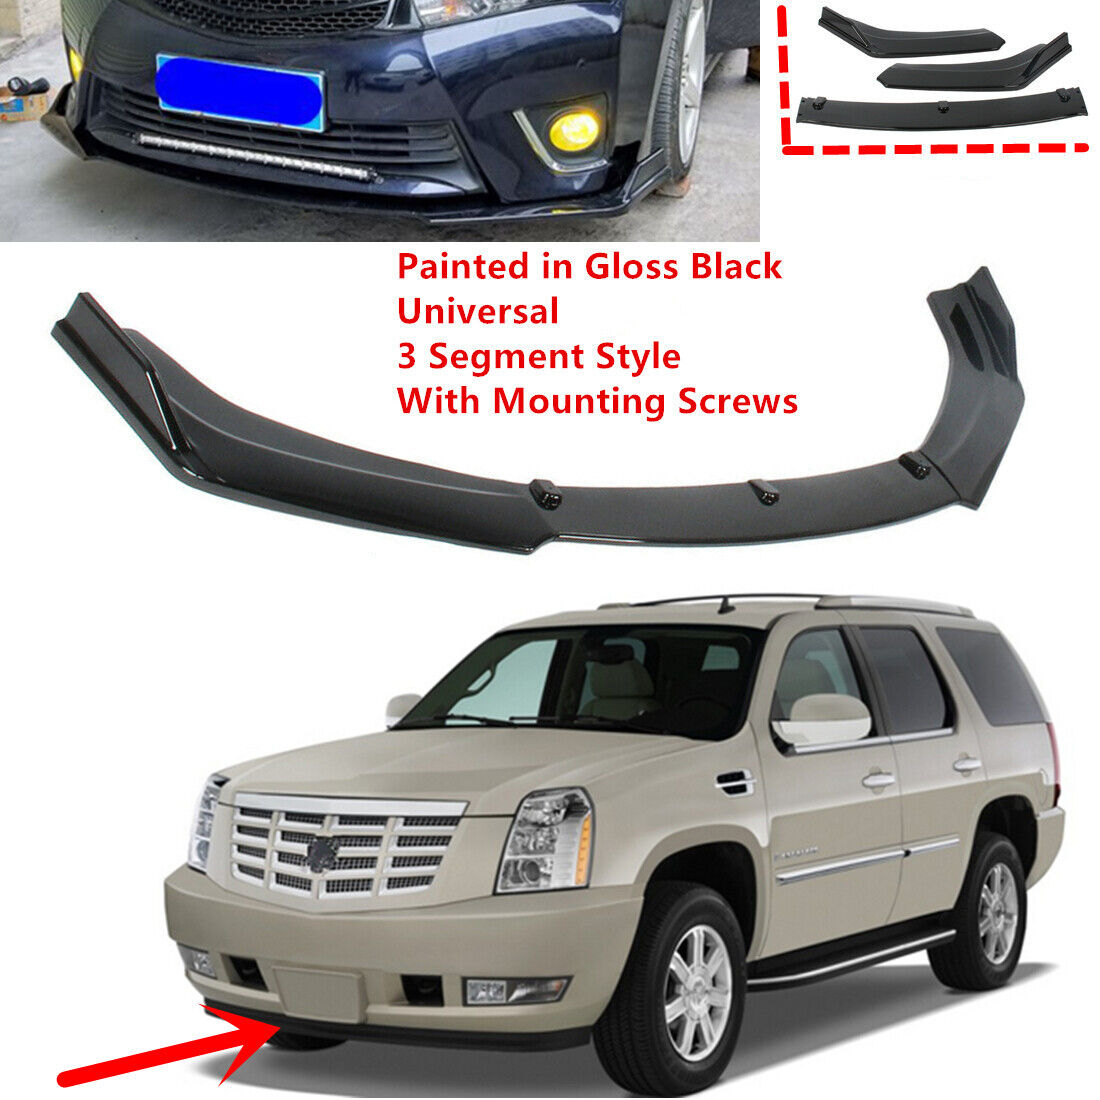 Add-on Universal Fit For Cadillac Escalade 2007-2014 Front Lip Splitter Spoiler